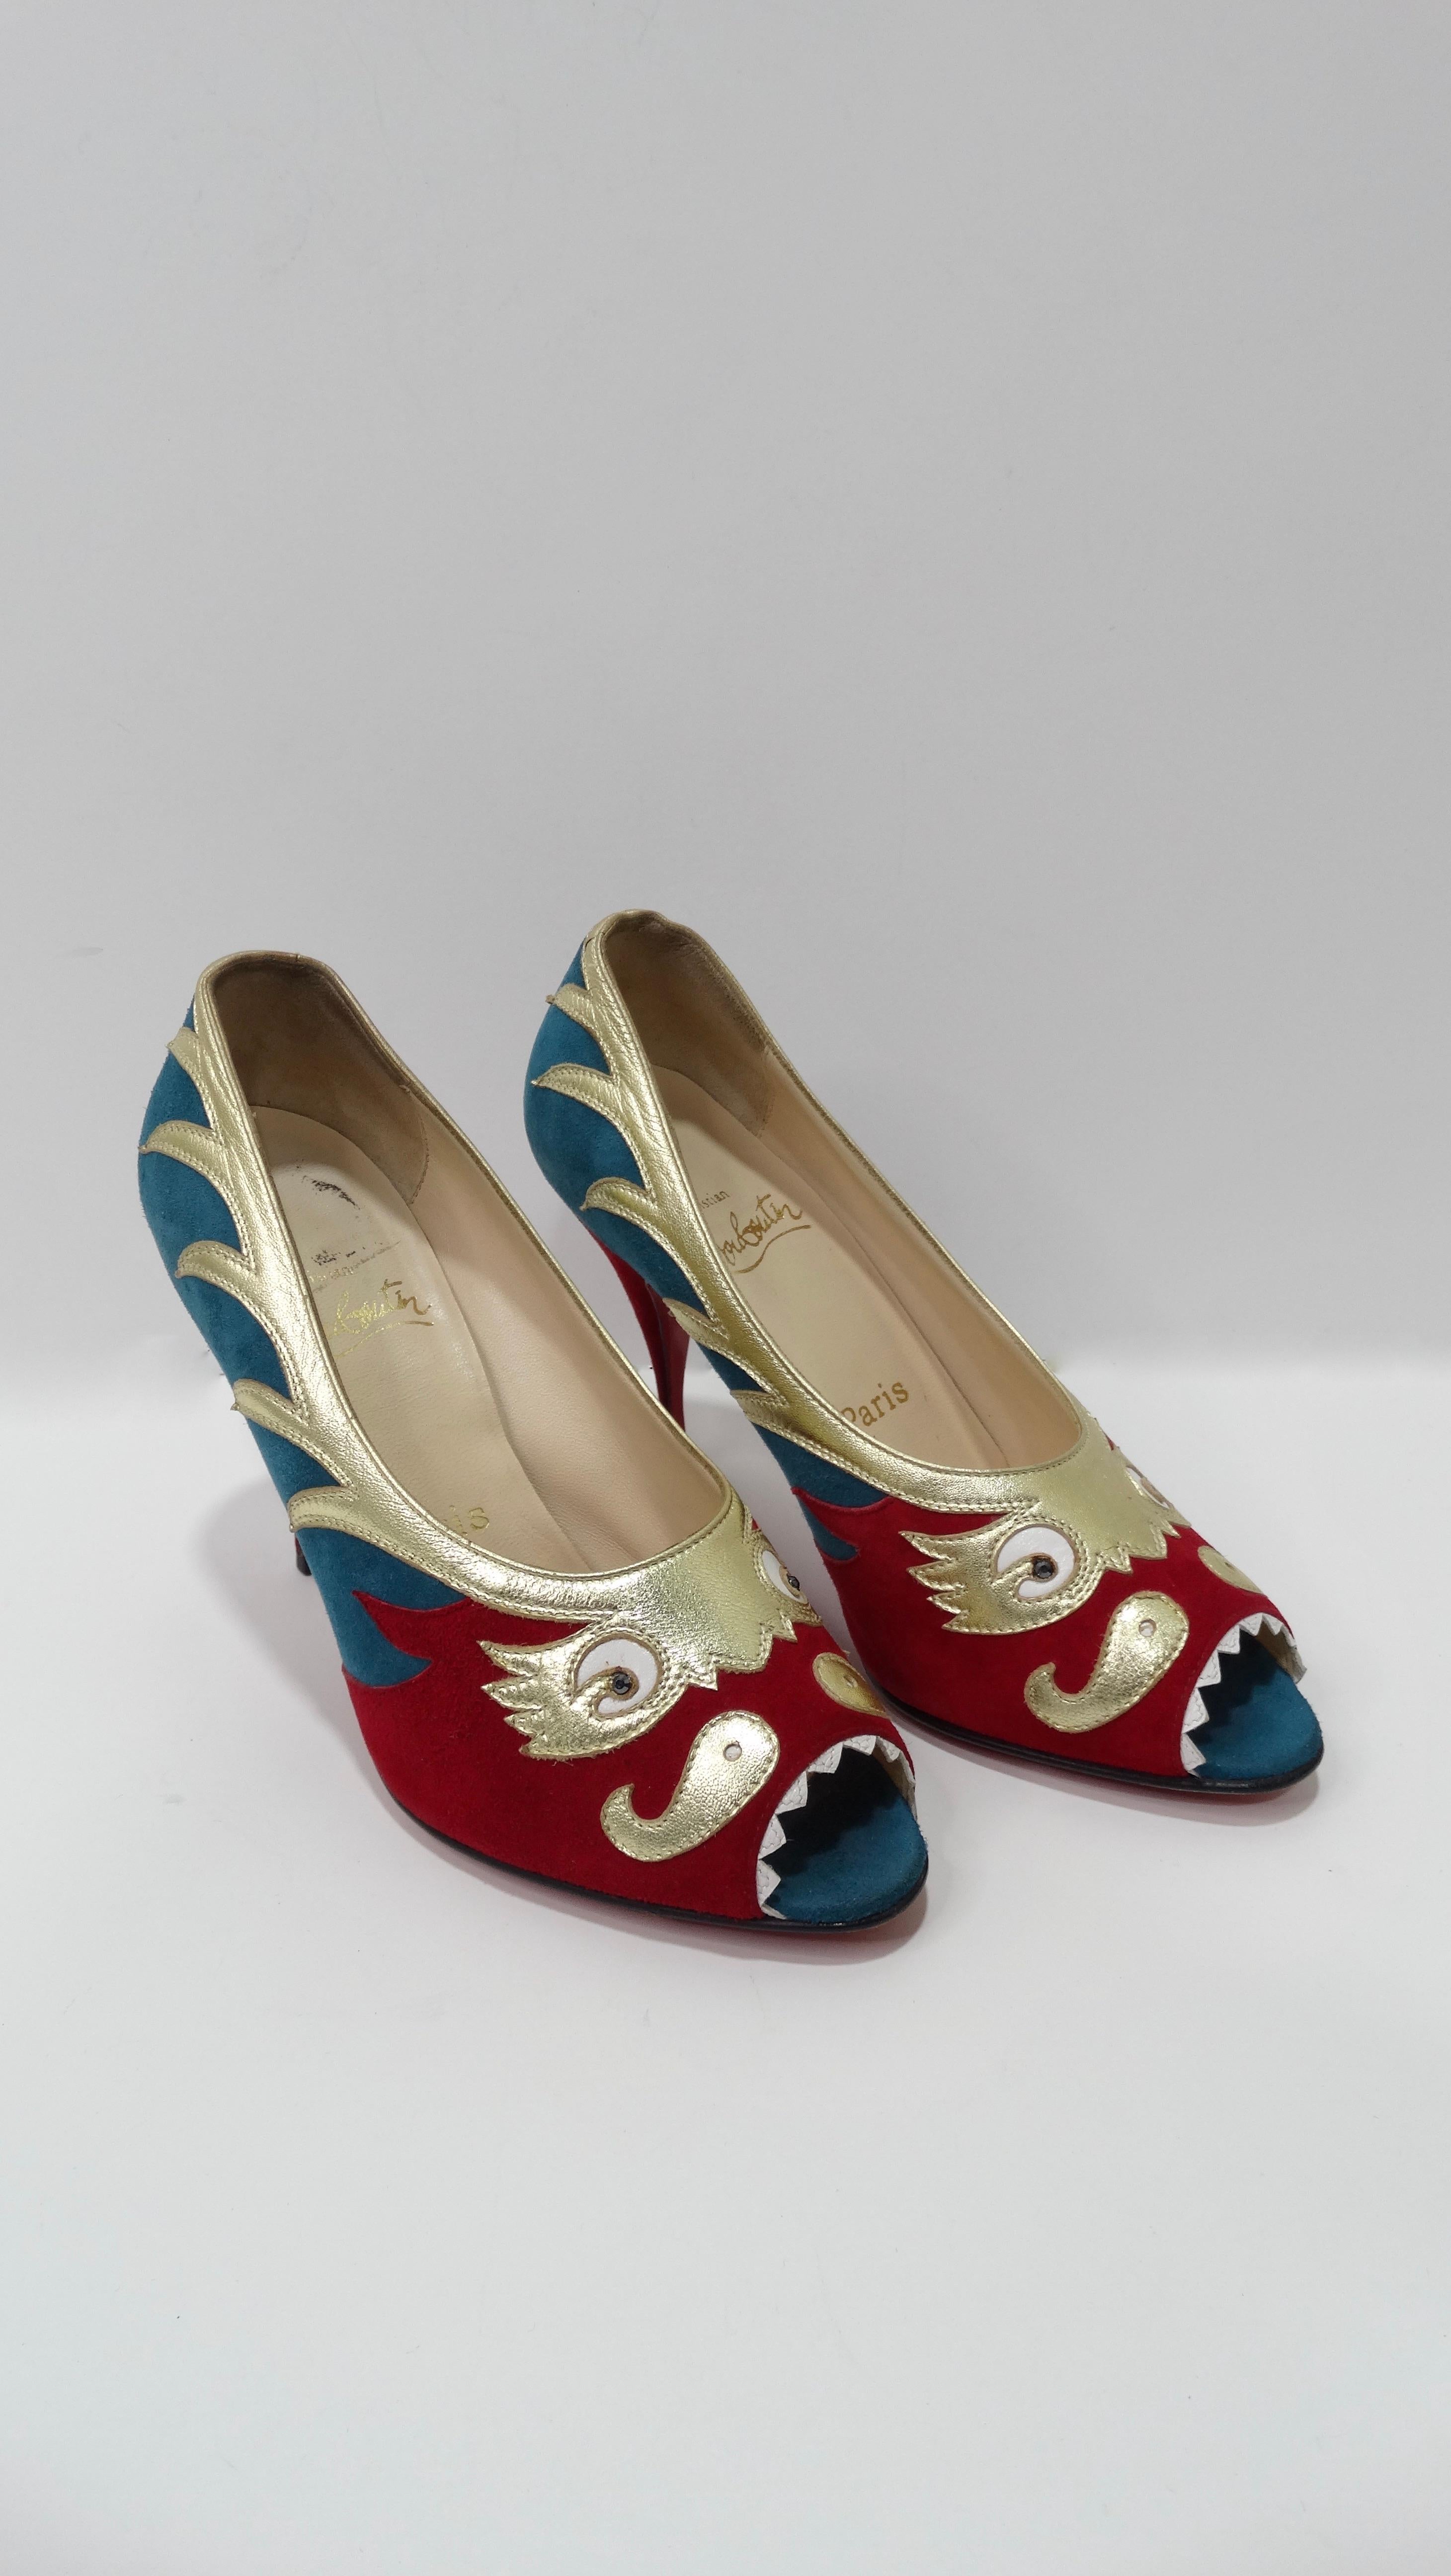 Elevate your look with these amazing Louboutin heels! Circa 2000s, these heels are crafted from teal/rich red suede and gold metallic leather to form a Chinese dragon motif. Dragon features black rhinestone eyes and white leather teeth that trim the